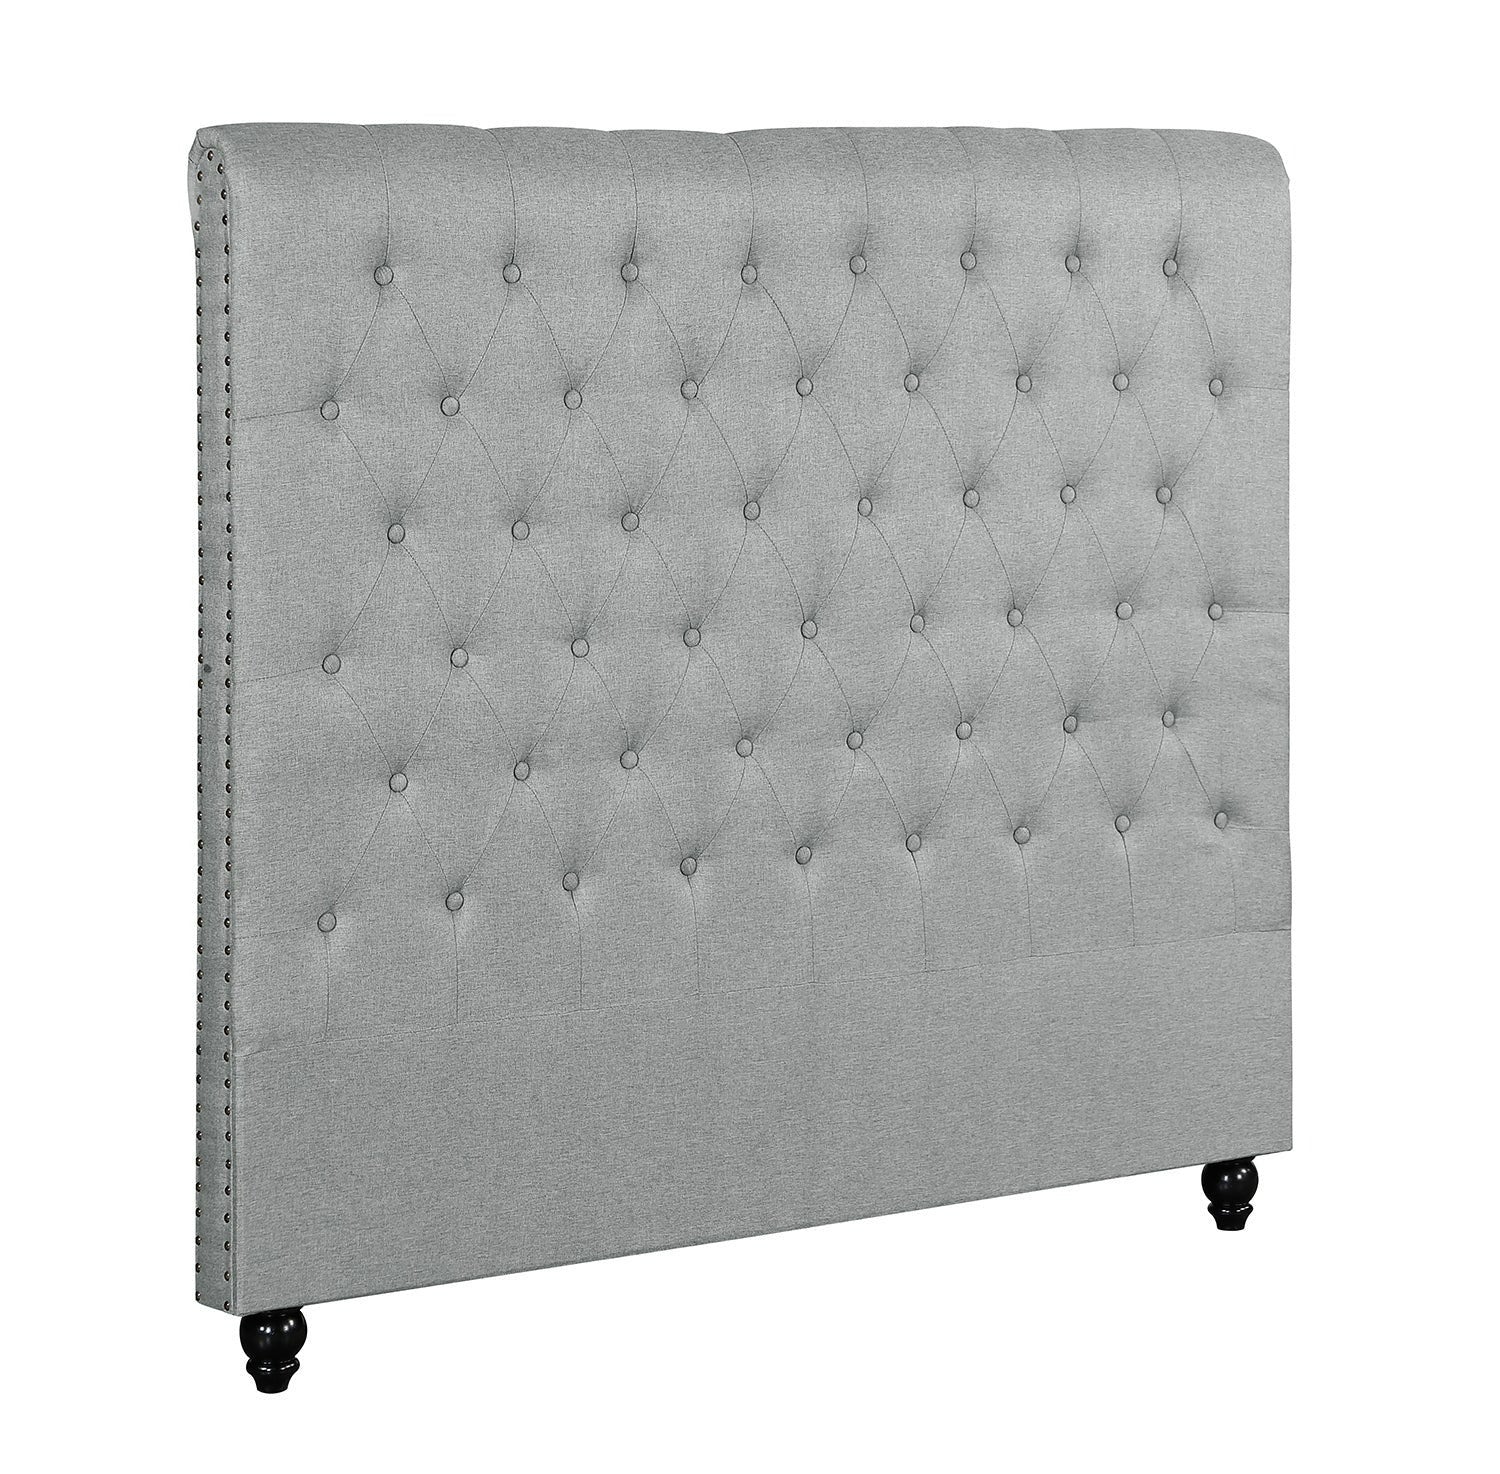 Foret Bed Head Double Size Upholstered Headboard Bedhead Frame Fabric Grey